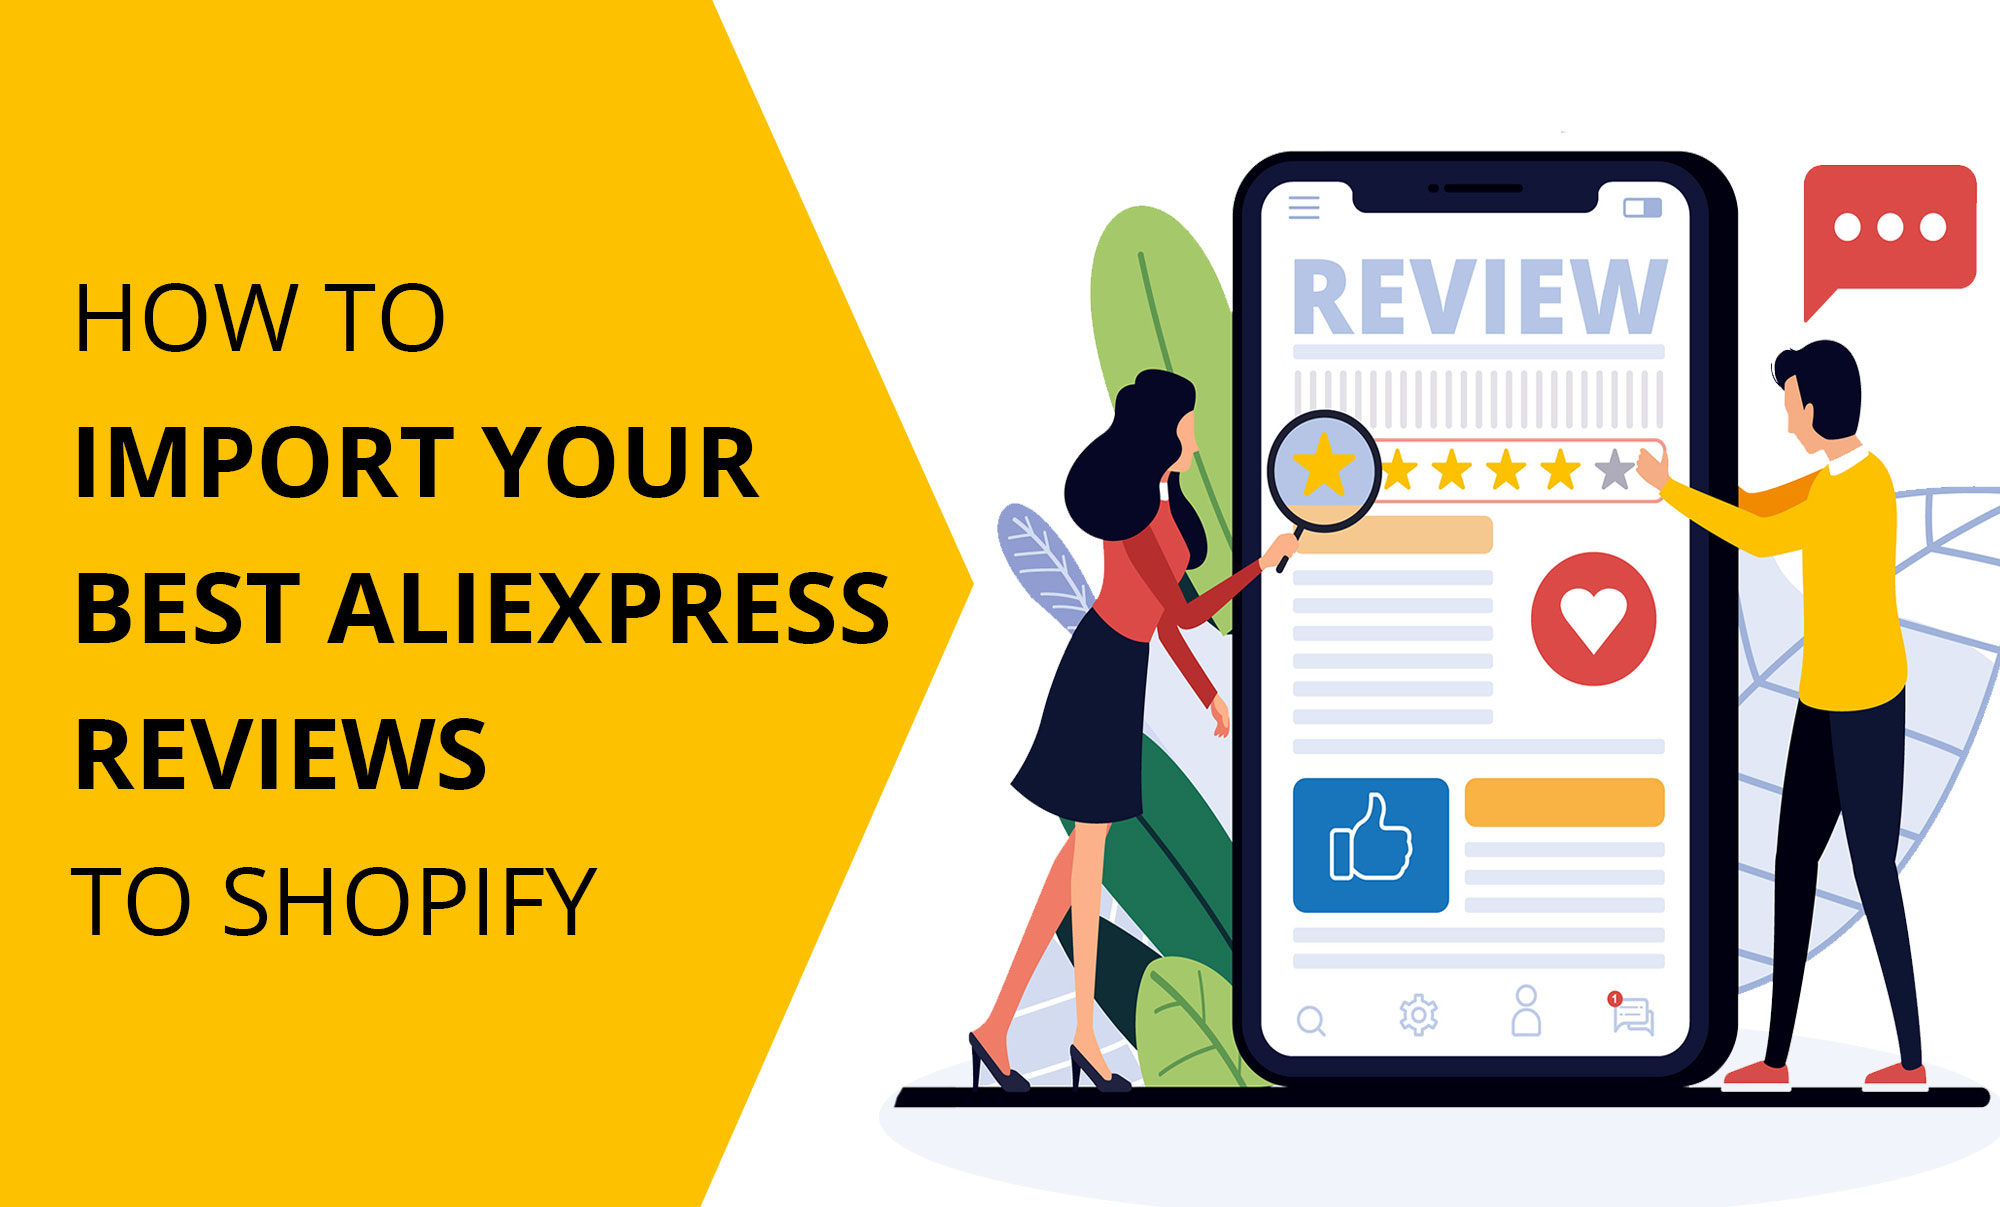 How can you import your best Amazon & Aliexpress reviews into your Shopify website